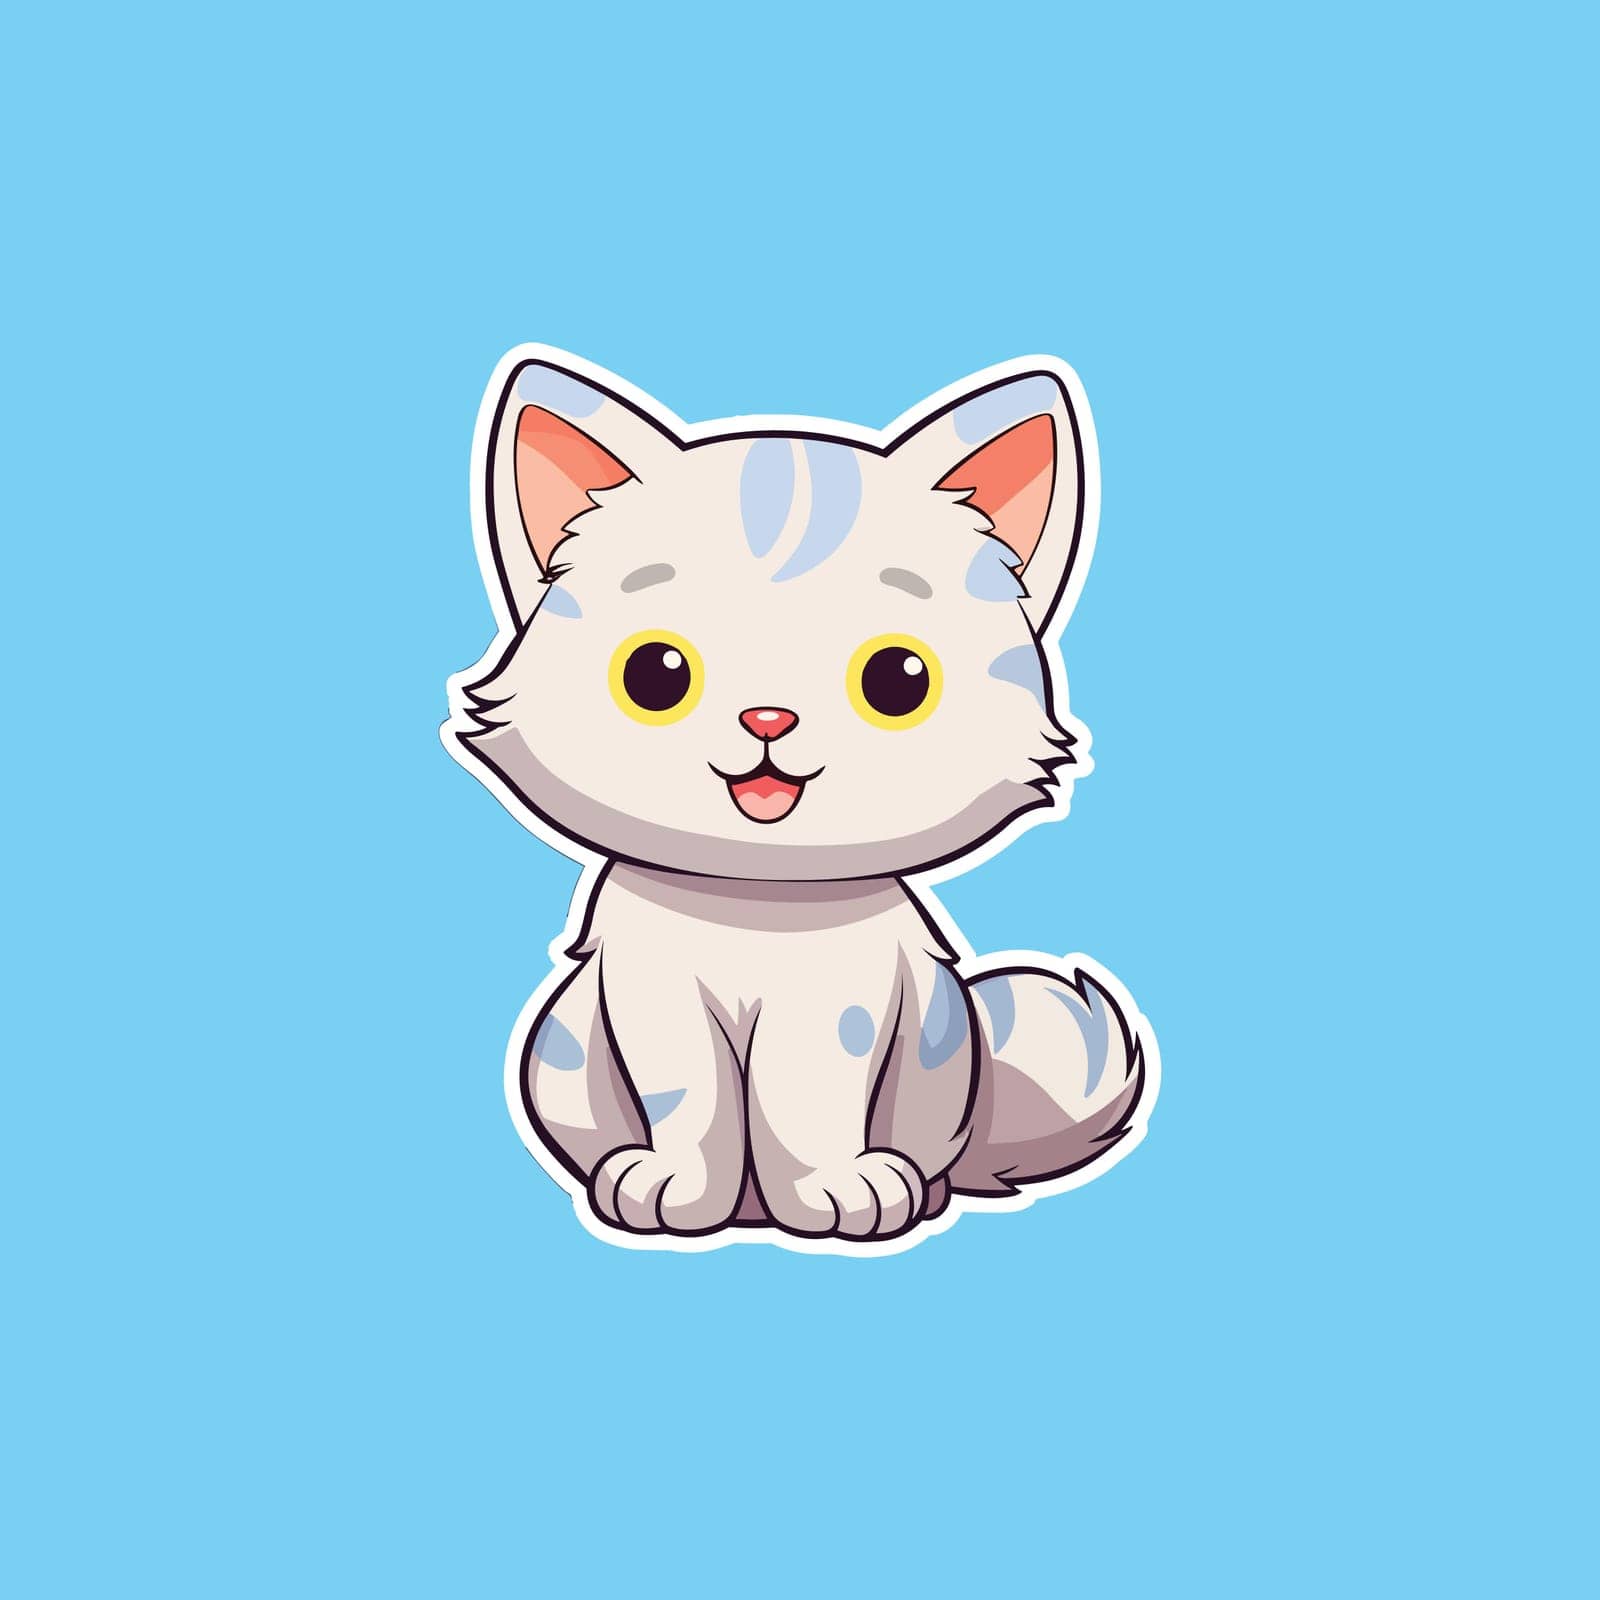 Cute cat sitting smiling isolated by Vinhsino